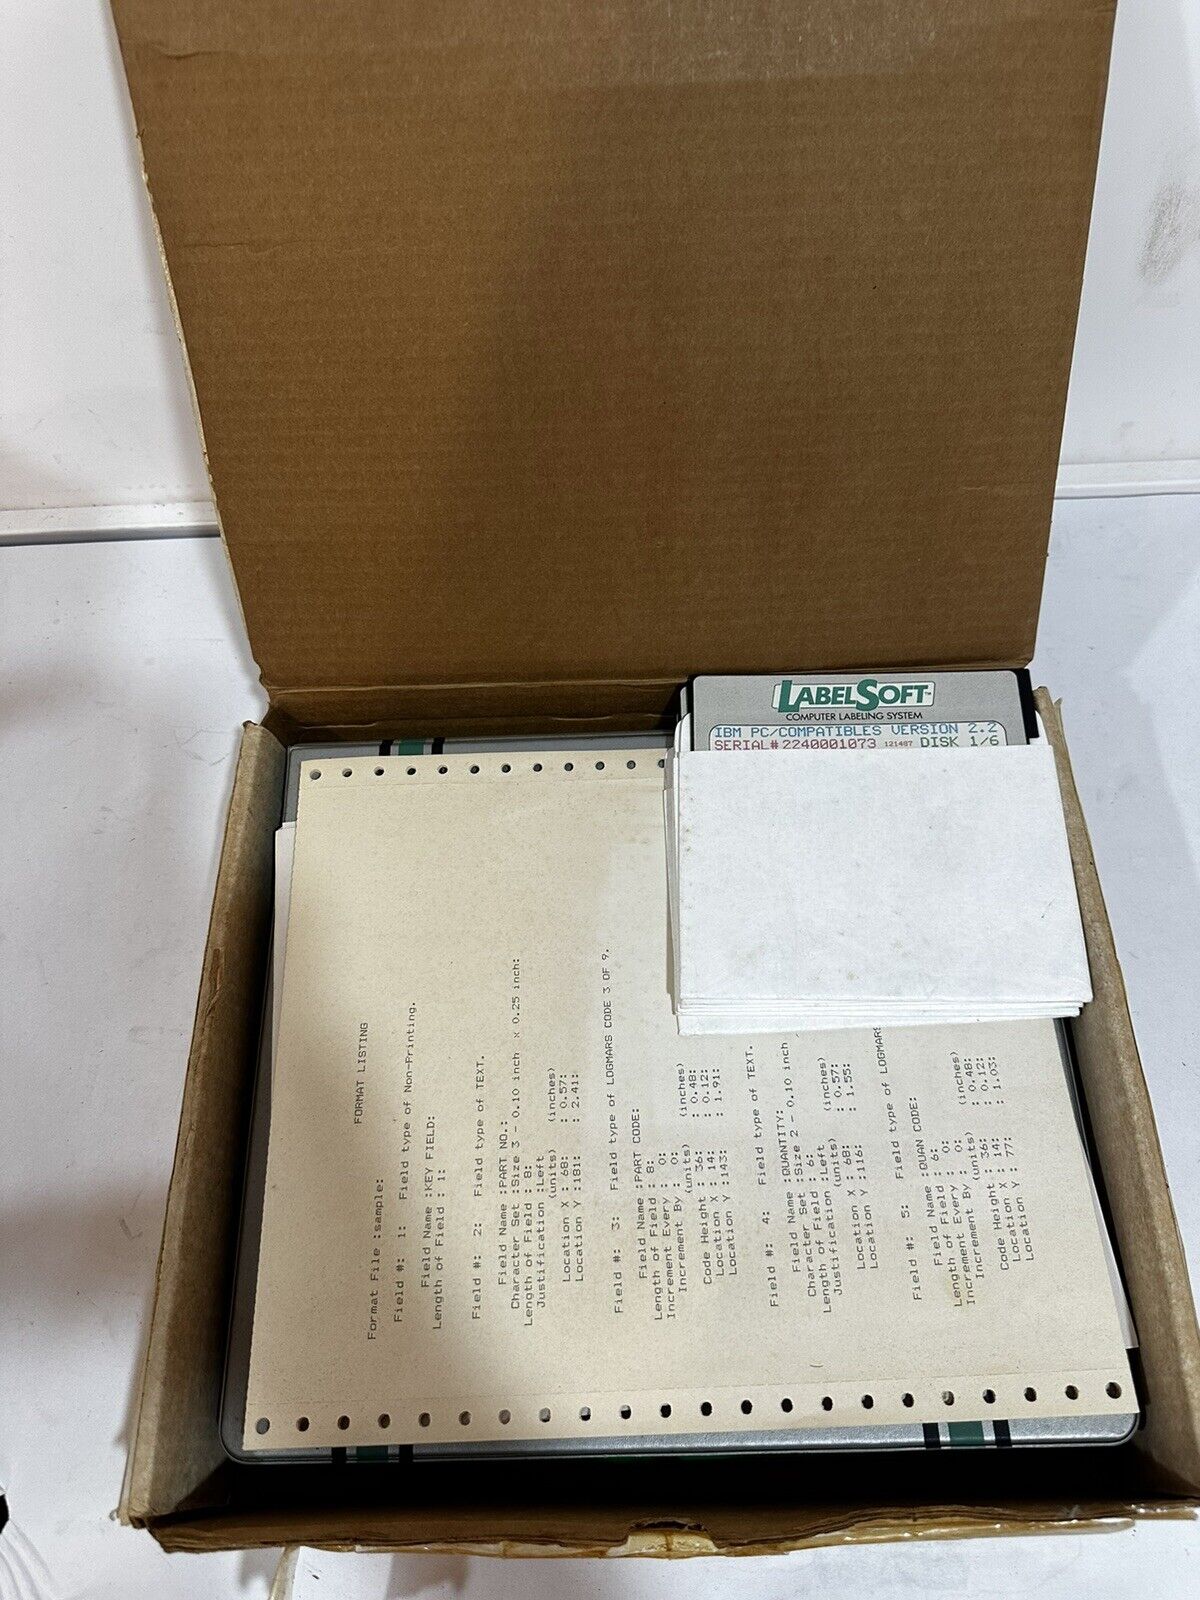 Vintage LabelSoft Computer Labeling System By PSC Perrysburg Software Corp IBM